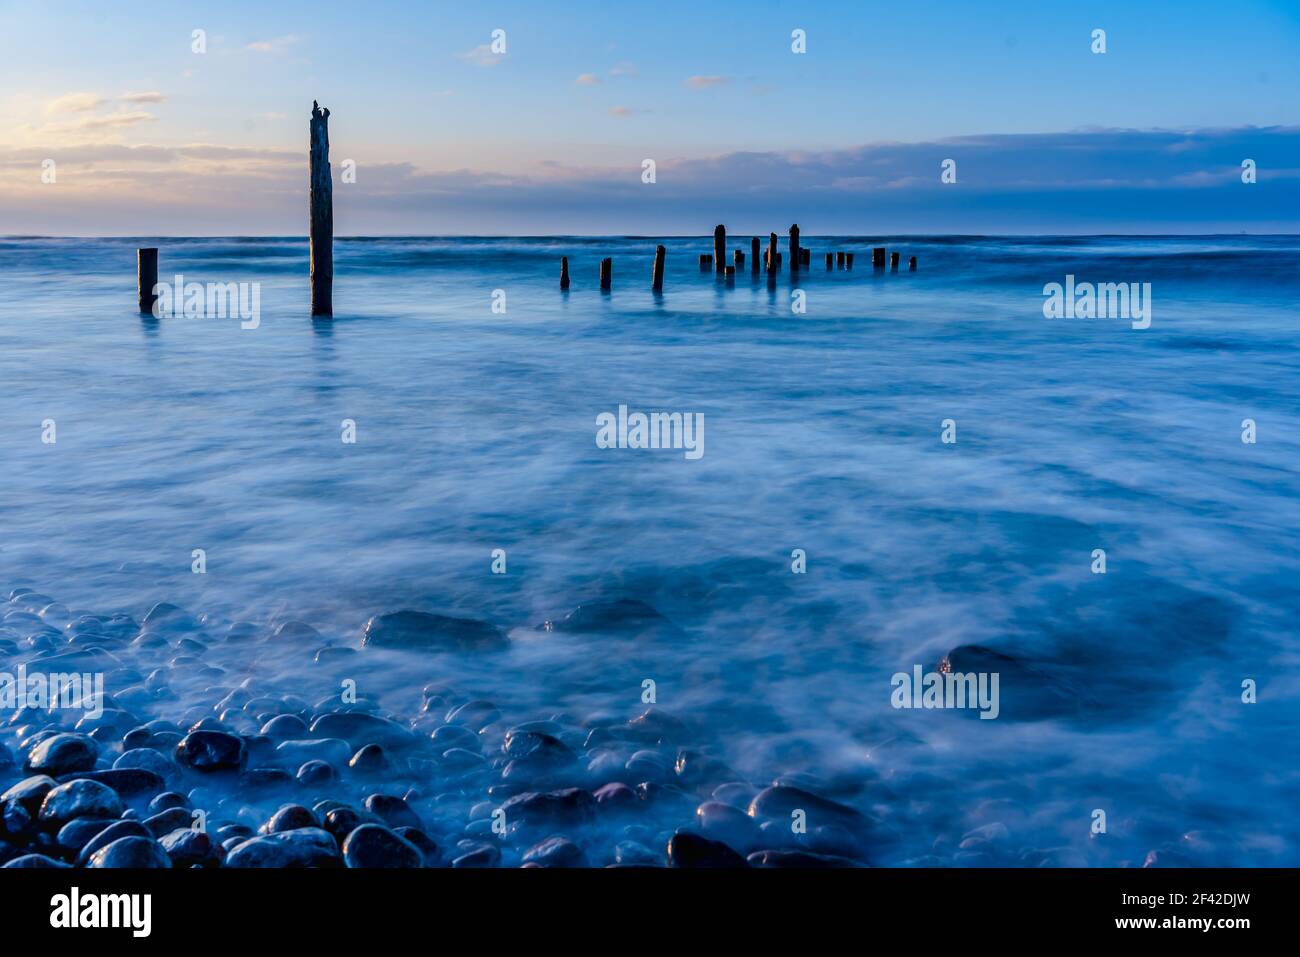 at sunset old wooden poles in the sea that are remnants of ancient times when fishermen fished from the shore with their small wooden fishing boats Stock Photo